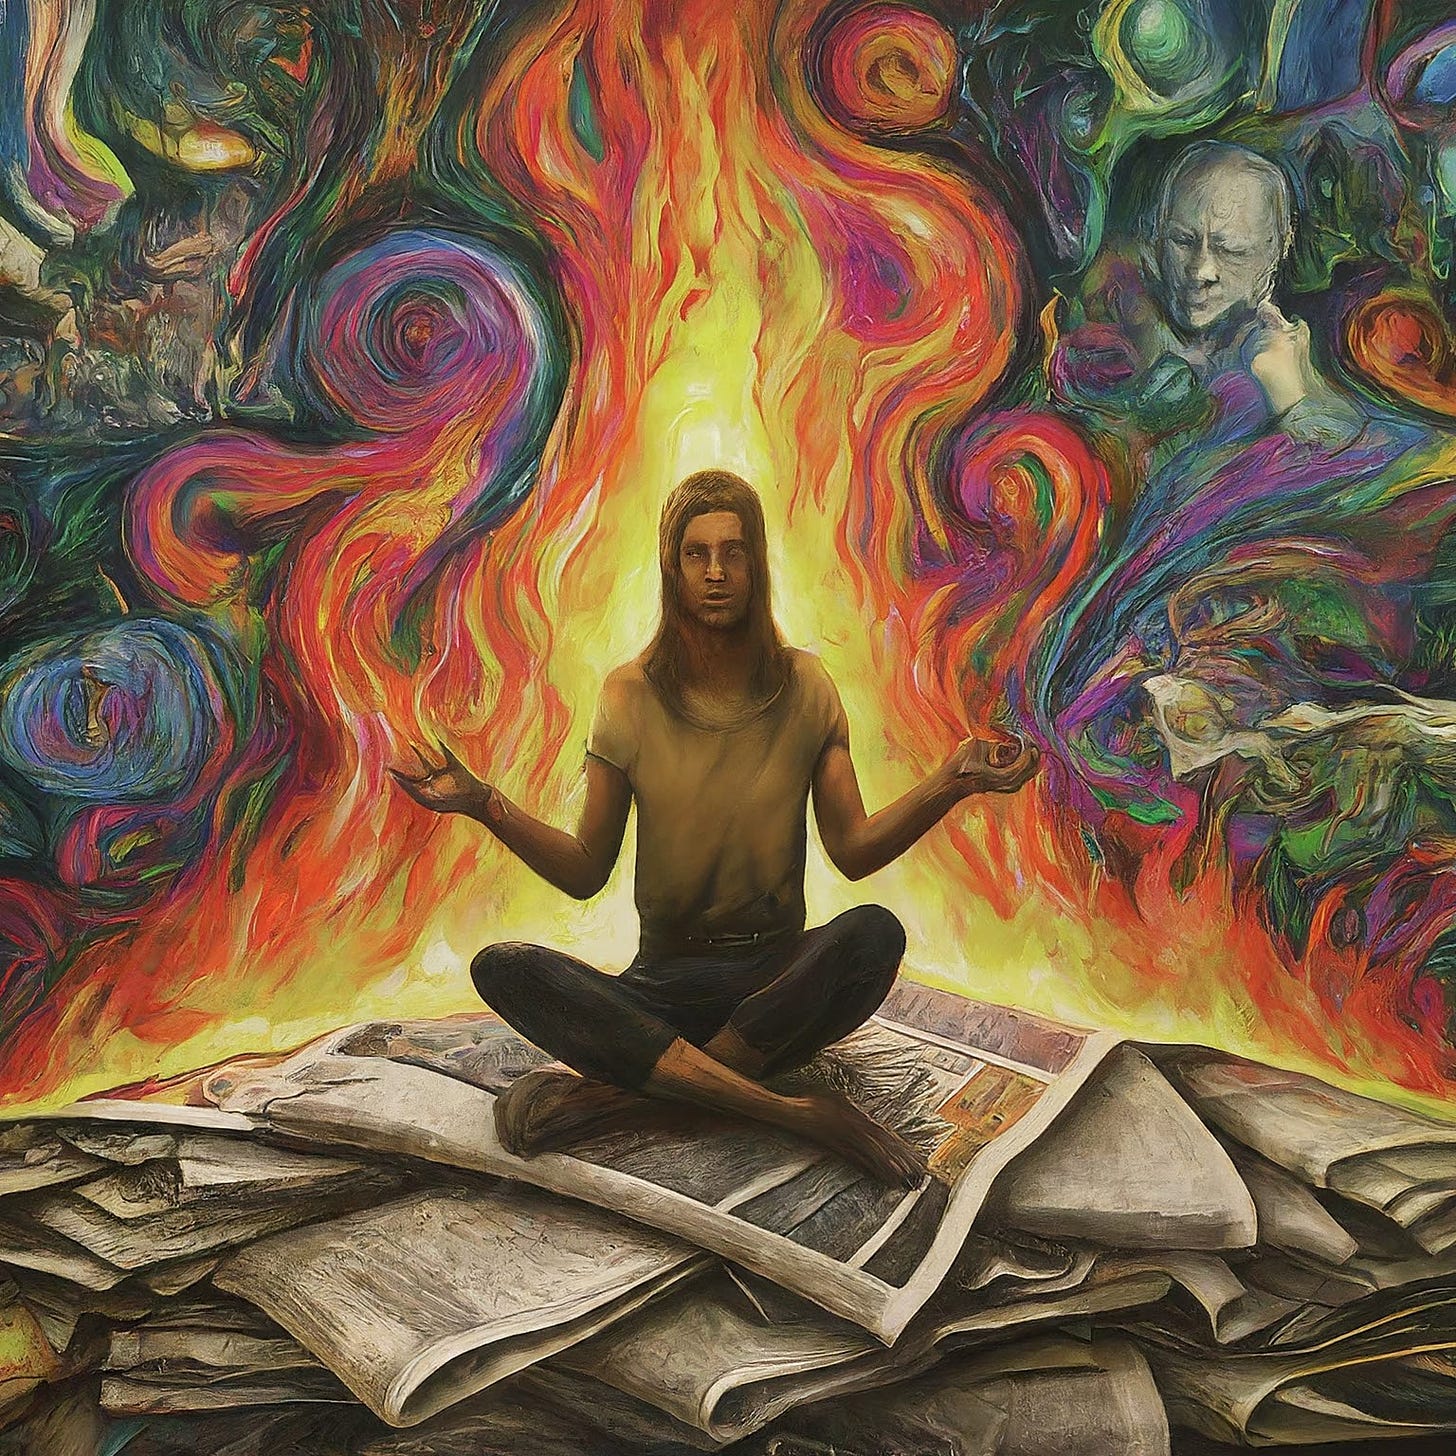 Psychedelic style image with a man meditating on a large pile of papers, with a fire in the background